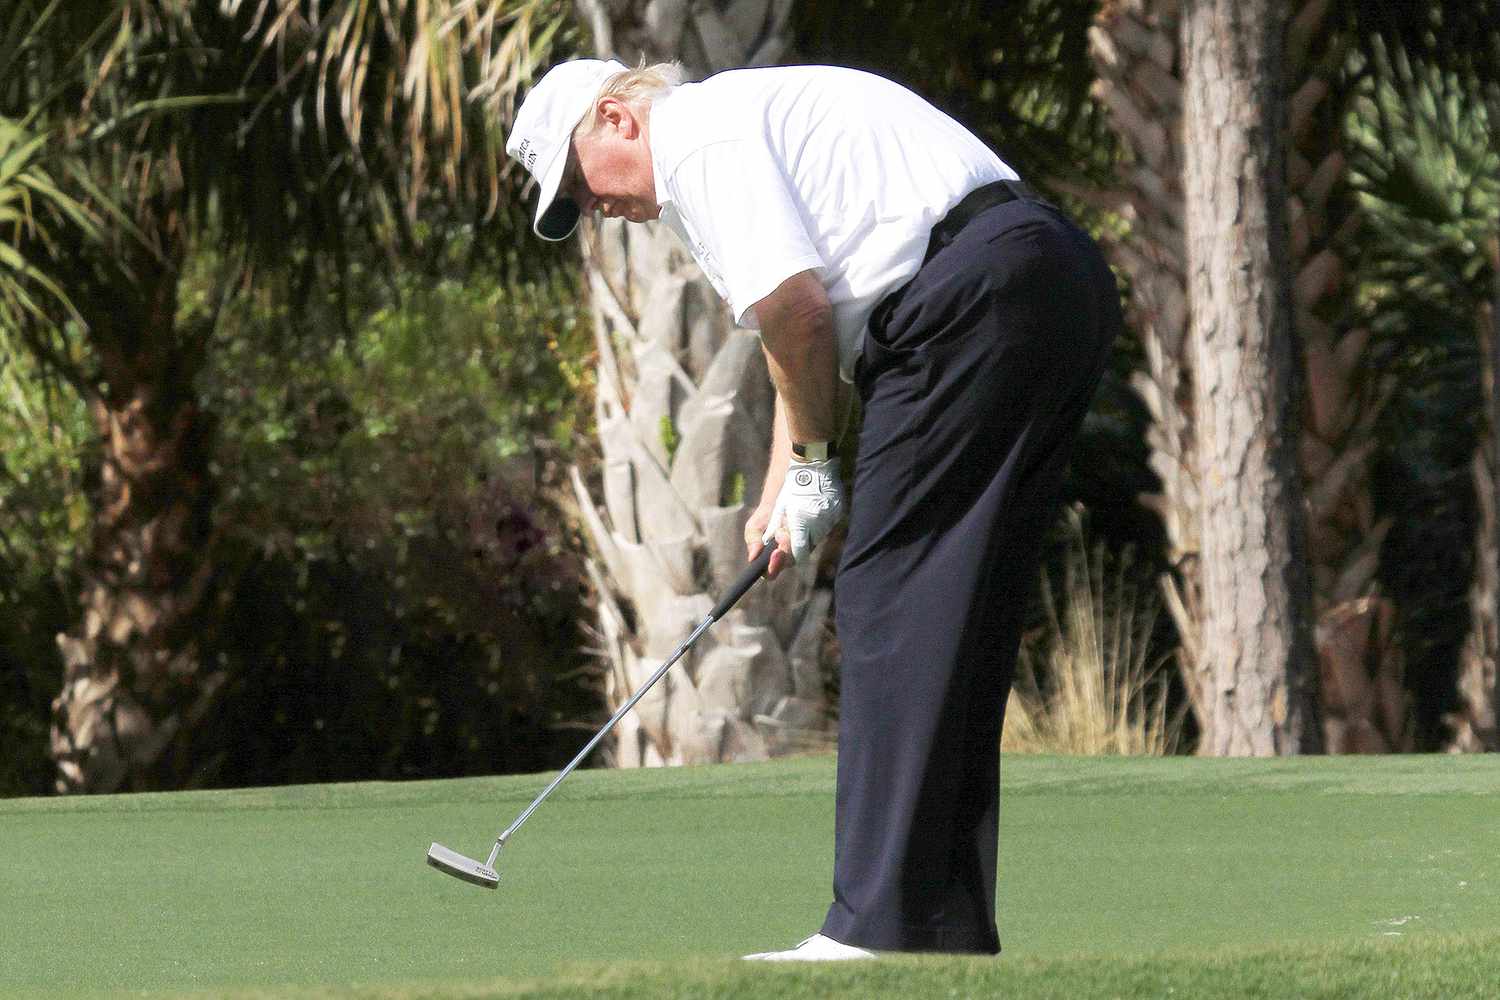 Exclusive... President Donald Trump & Japanese Prime Minister Shinzo Abe Play Golf In Florida